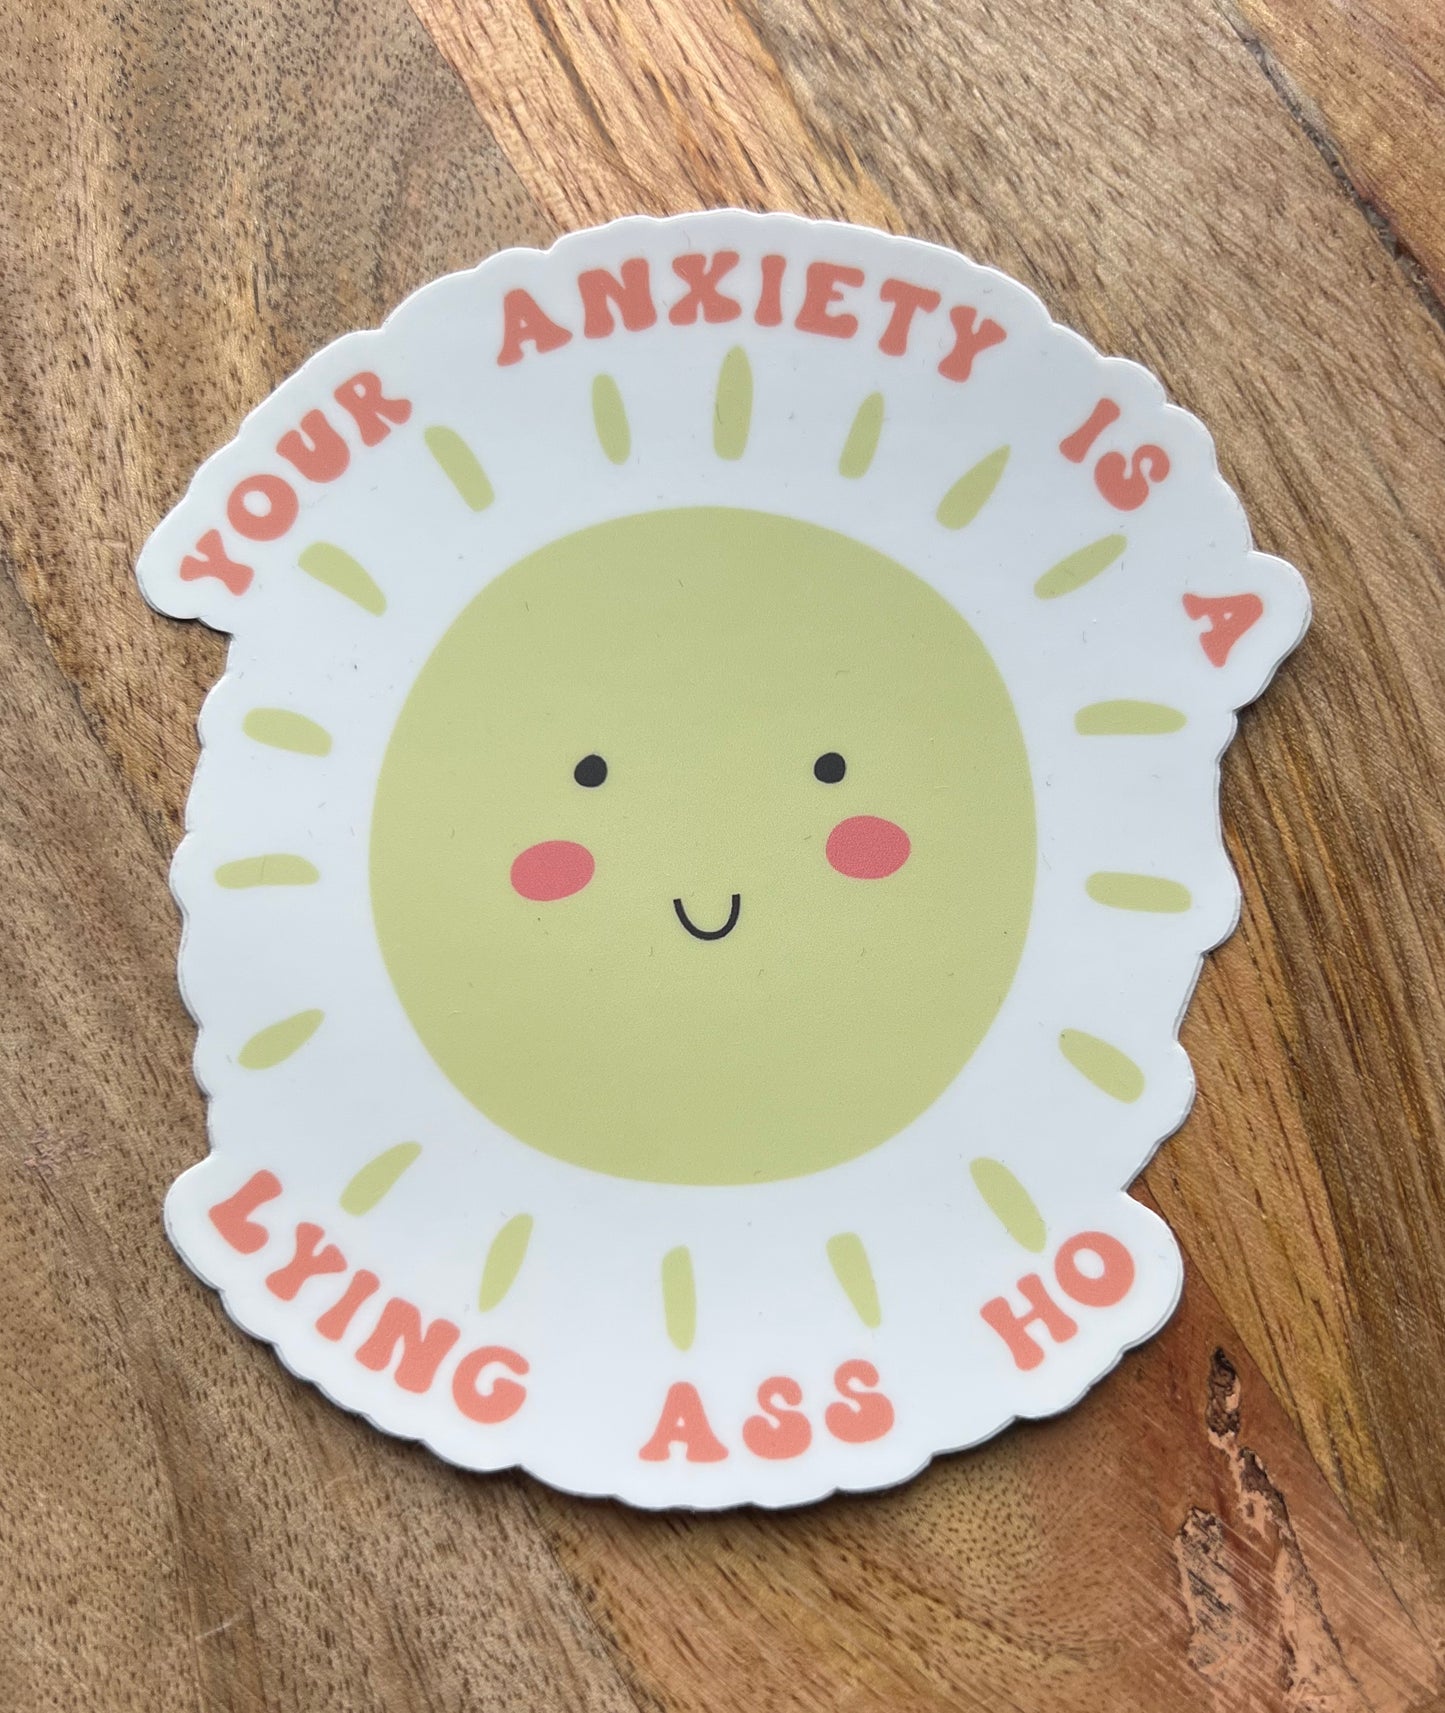 Your Anxiety Is A Lying Ass Ho Vinyl Sticker